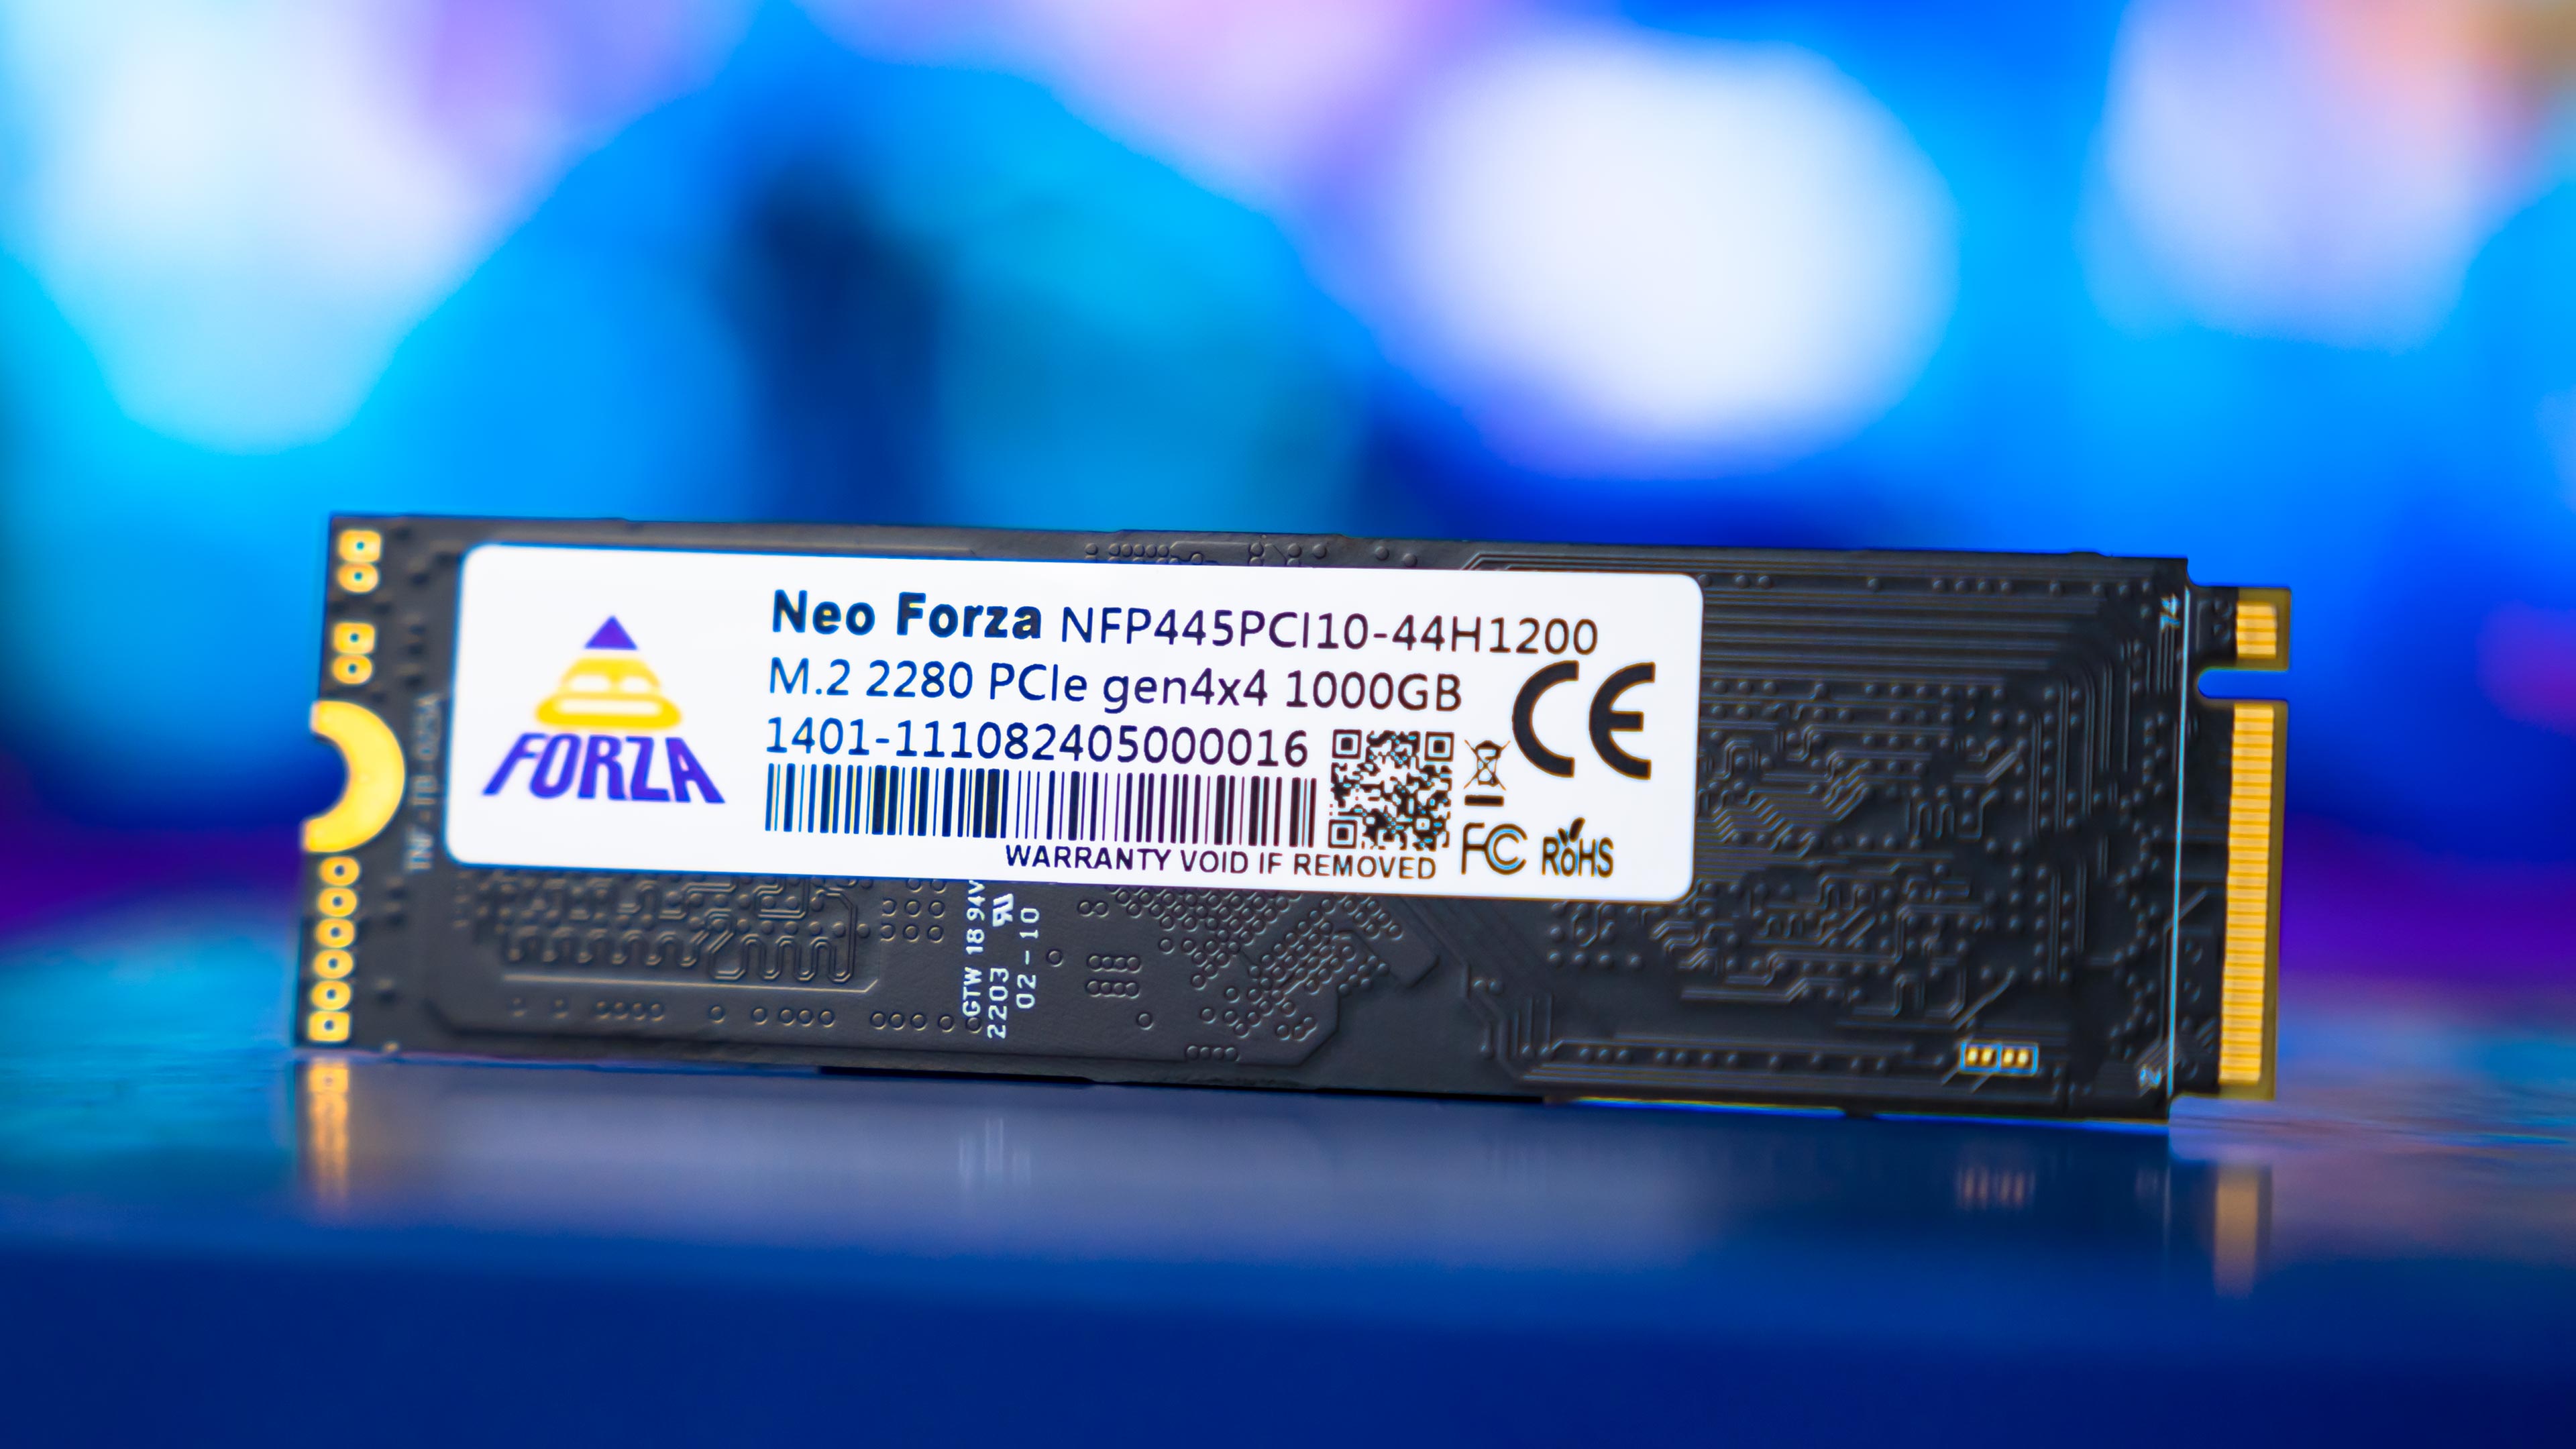 Neo Forza NFP445 1TB Gen4 M.2 SSD (2)